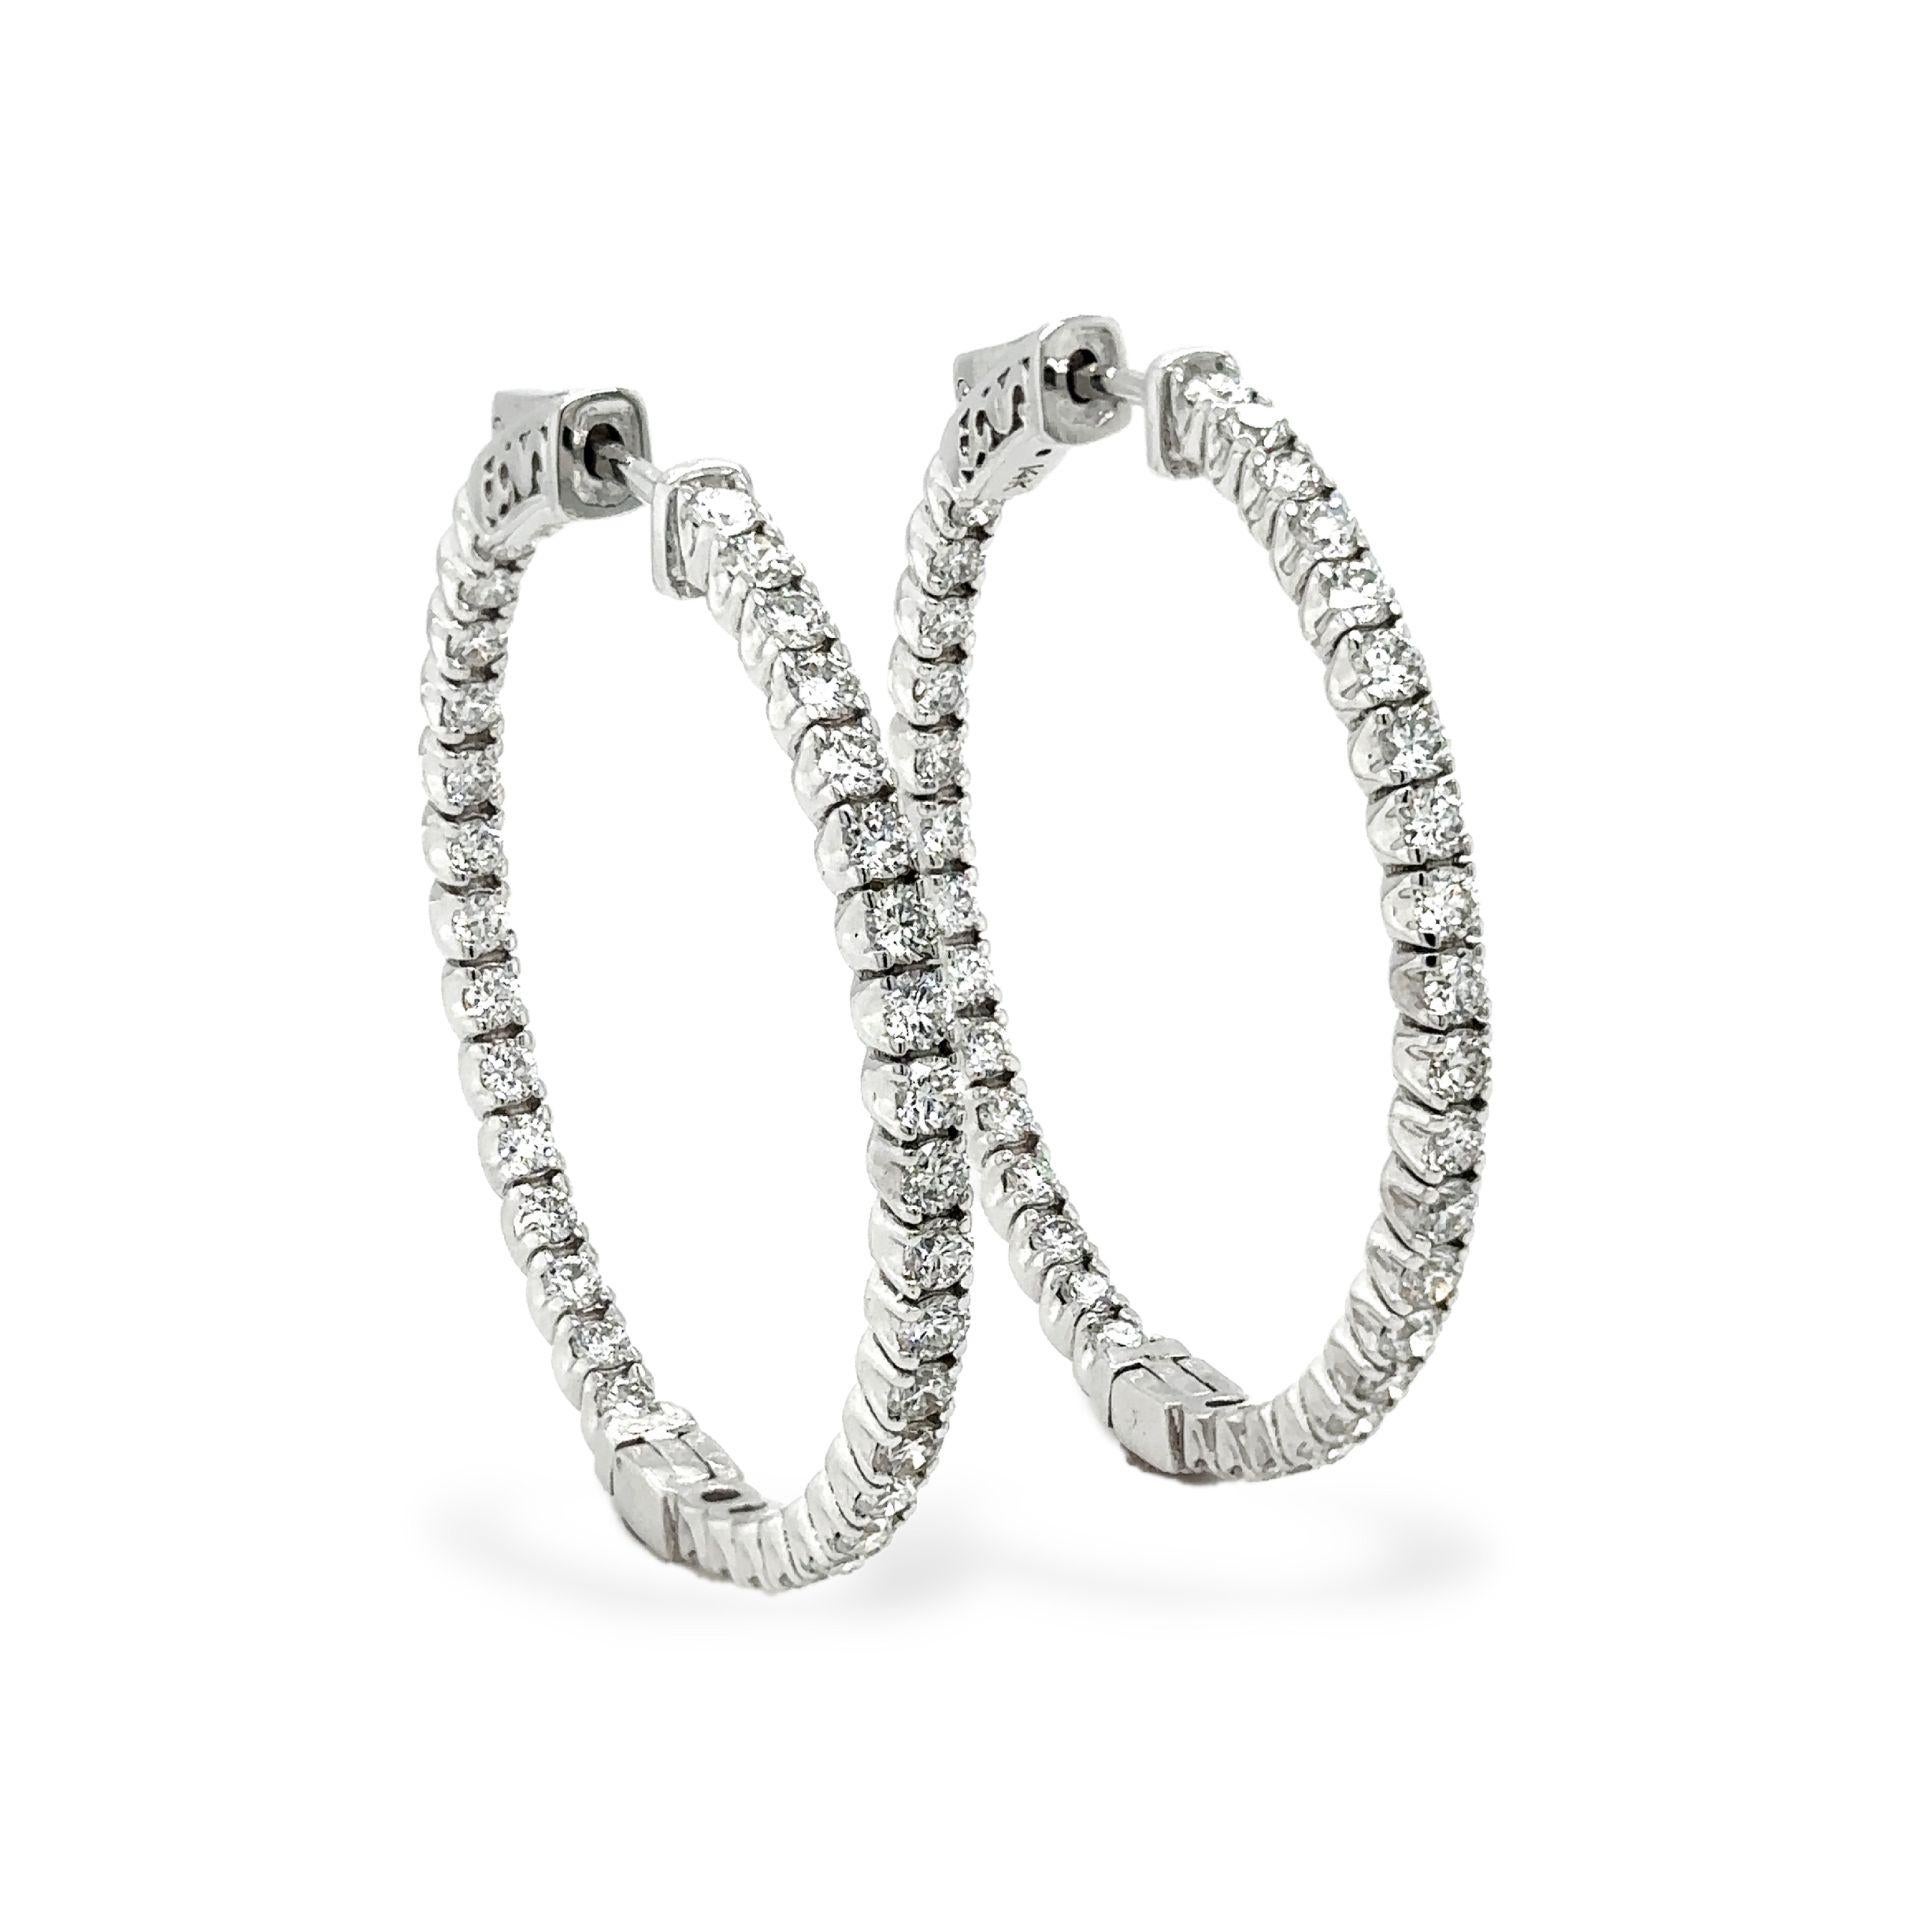 Diamond Hoop Earrings 14K White Gold 2.72 carats

STUNNING!!!

Diamond weighs 2.72 carat Total Weight

Diamonds are G I in Color and SI in Clarity

Hoop measurement: 35.0mm

Set in 14K White Gold

Item #: J5794